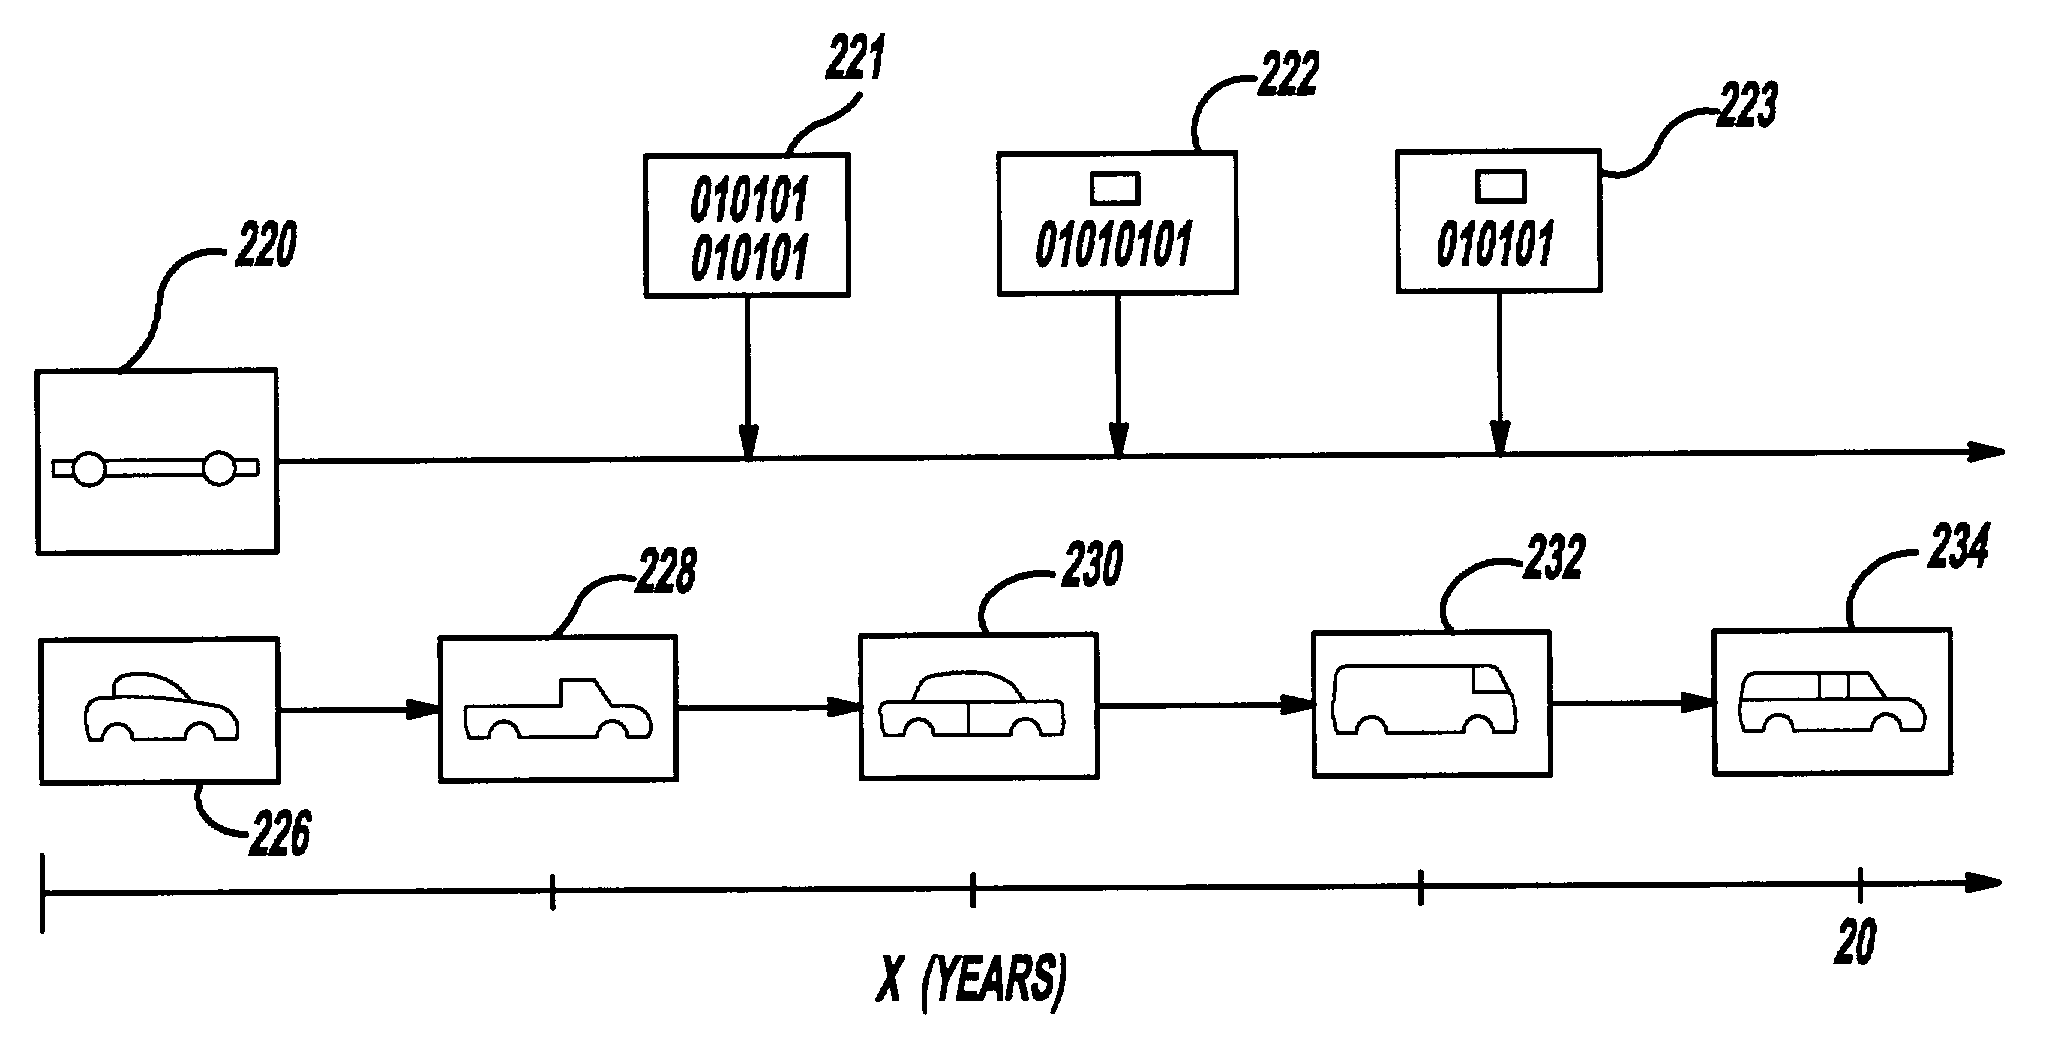 Method of designing and manufacturing vehicles